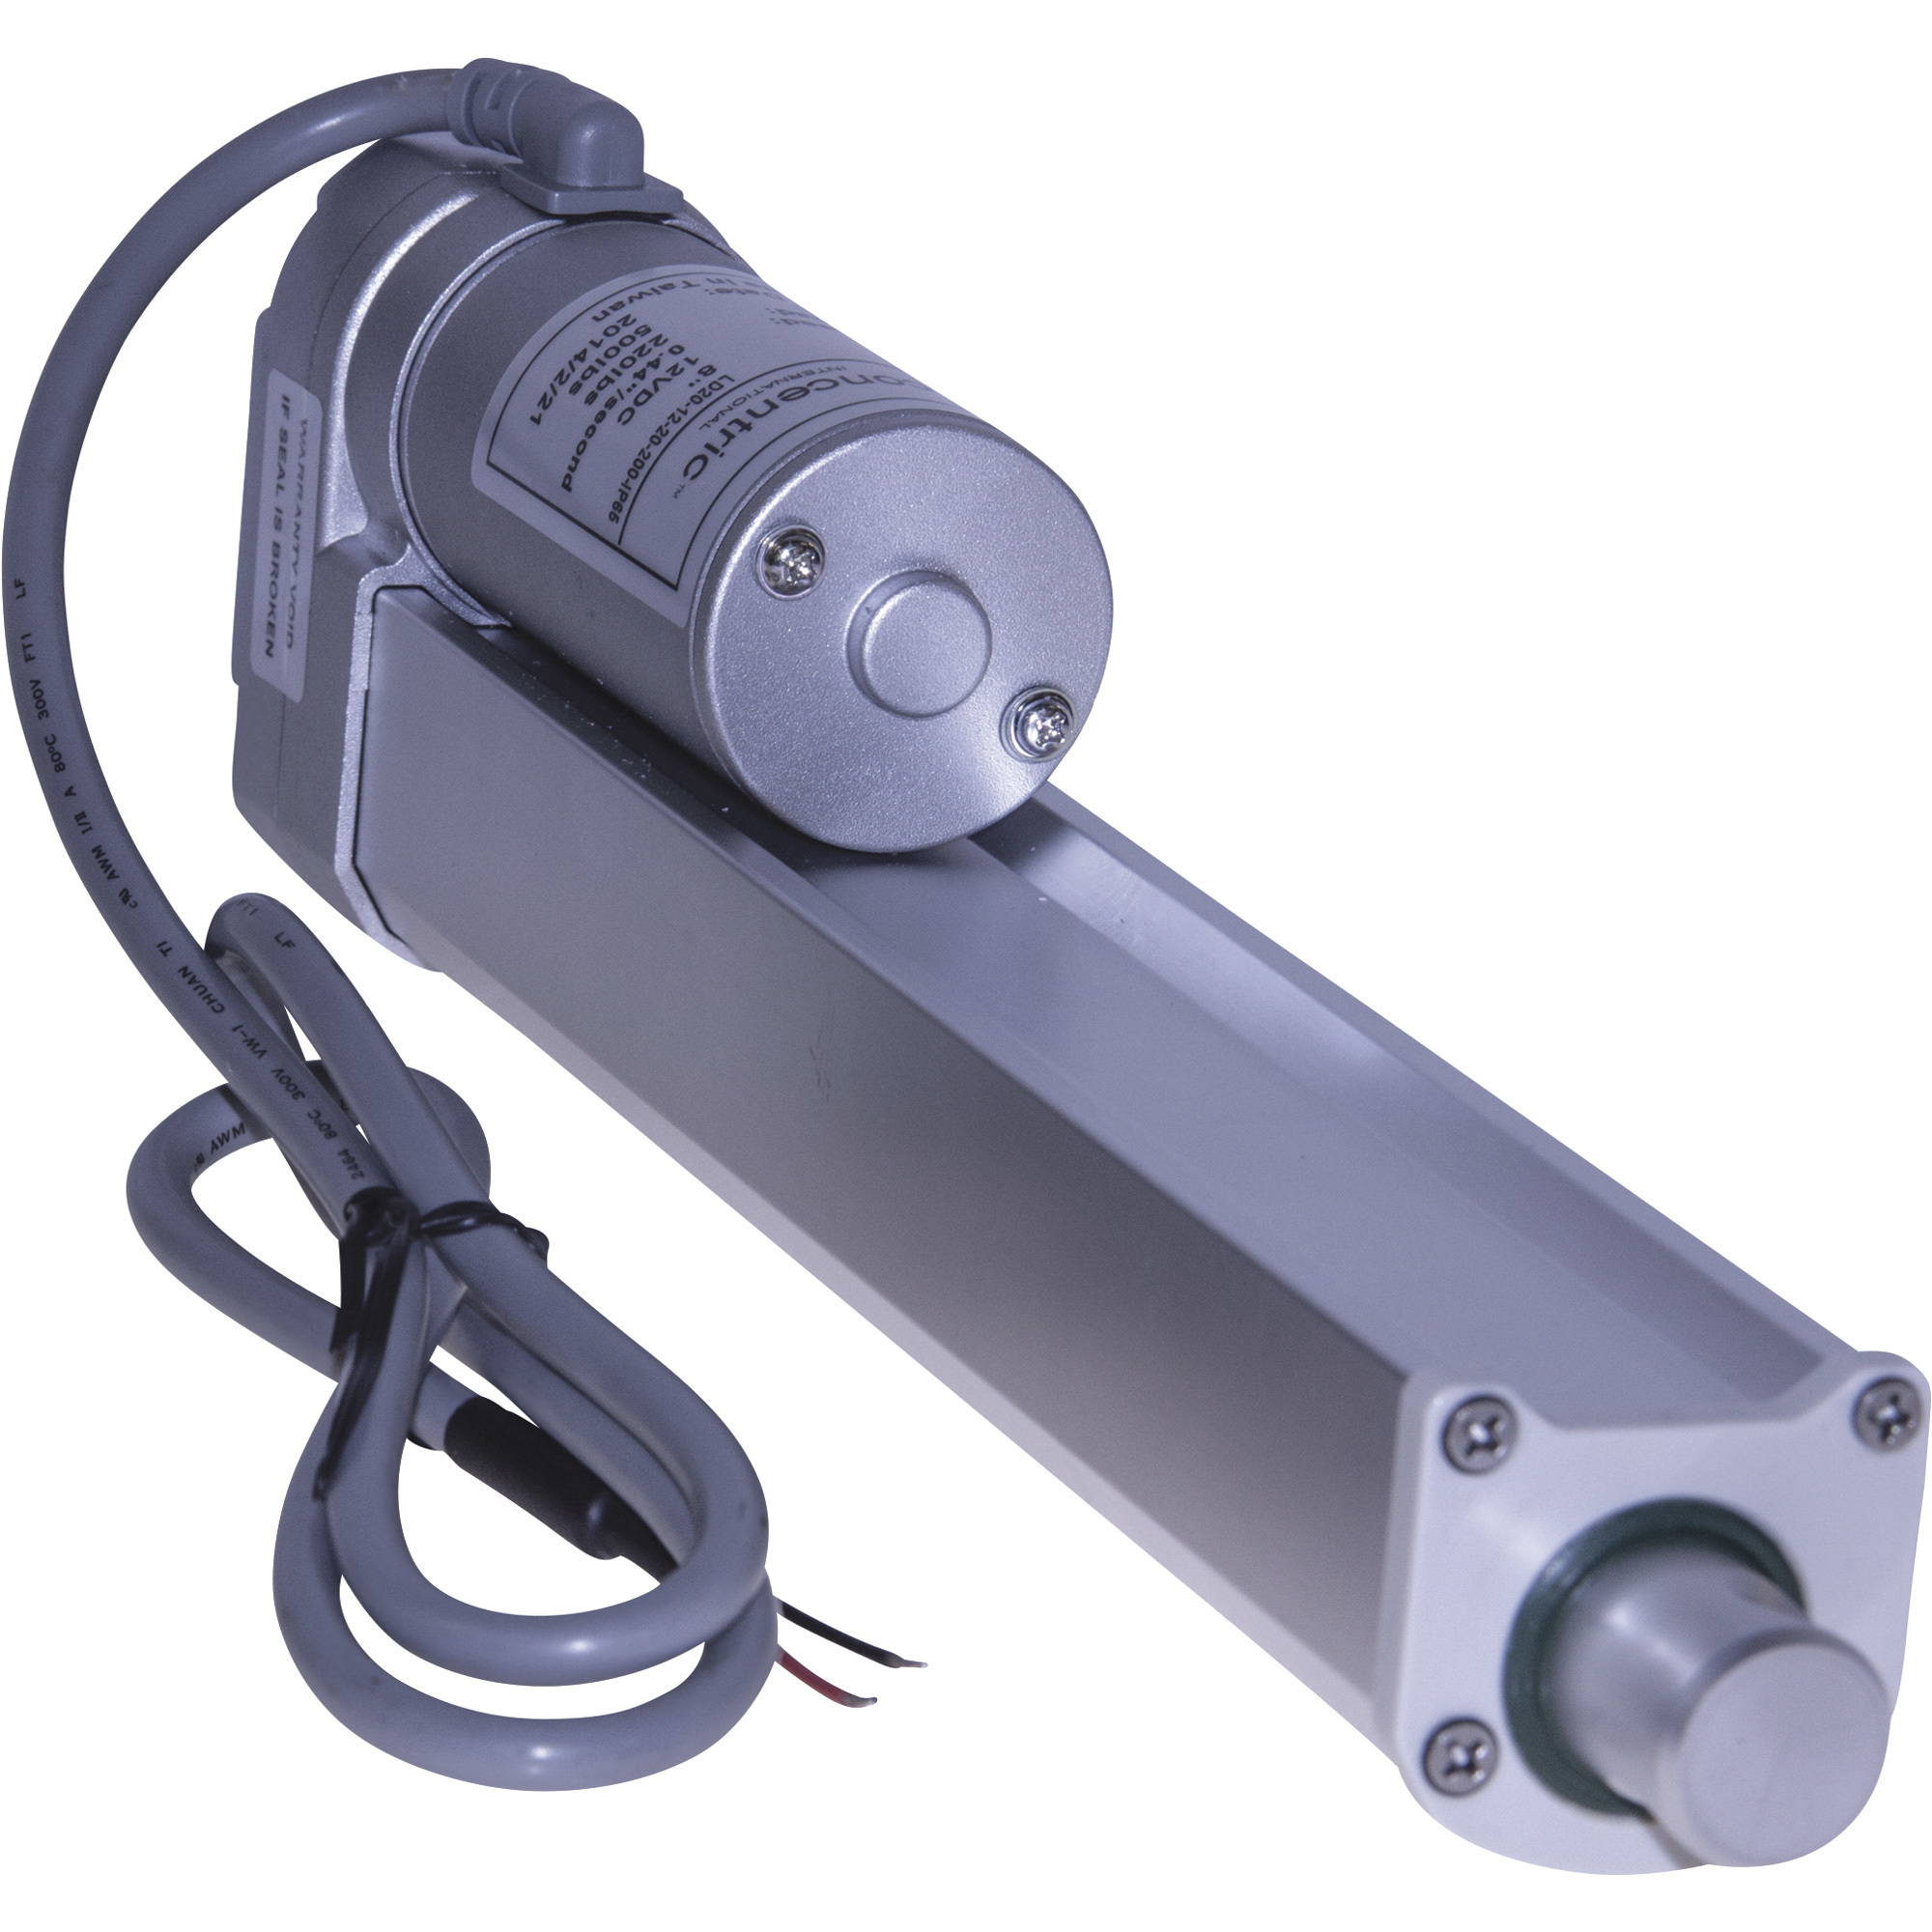 Glideforce 225-Lb. Capacity Linear Actuator by Concentric â 12Inch Medium-Duty, 11.81Inch Stroke, Model MD122012